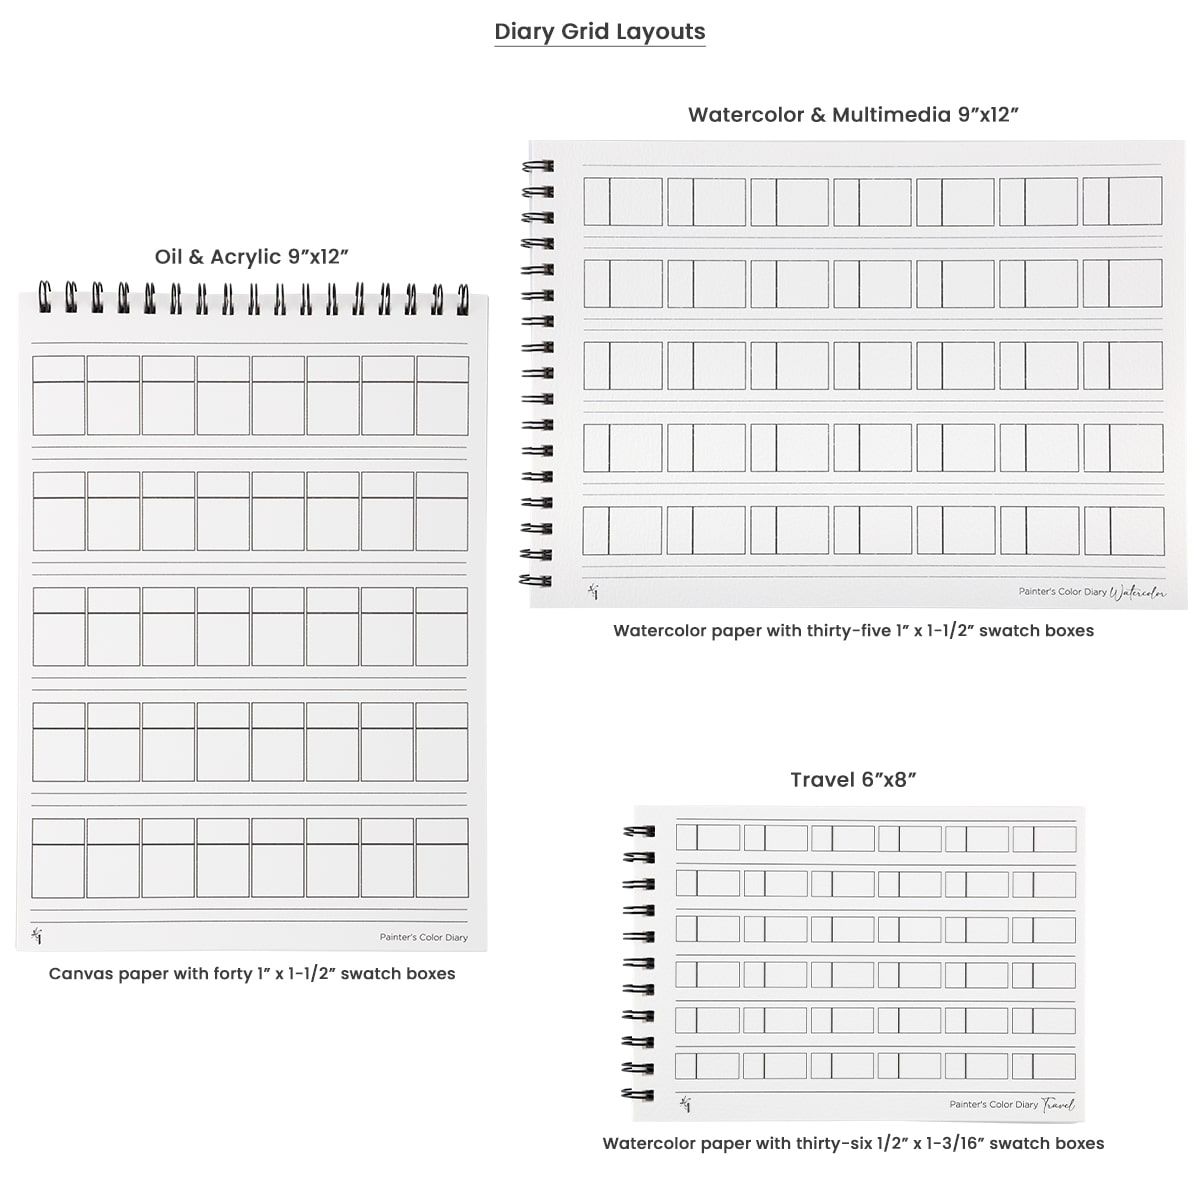 Outlined swatch boxes on each page